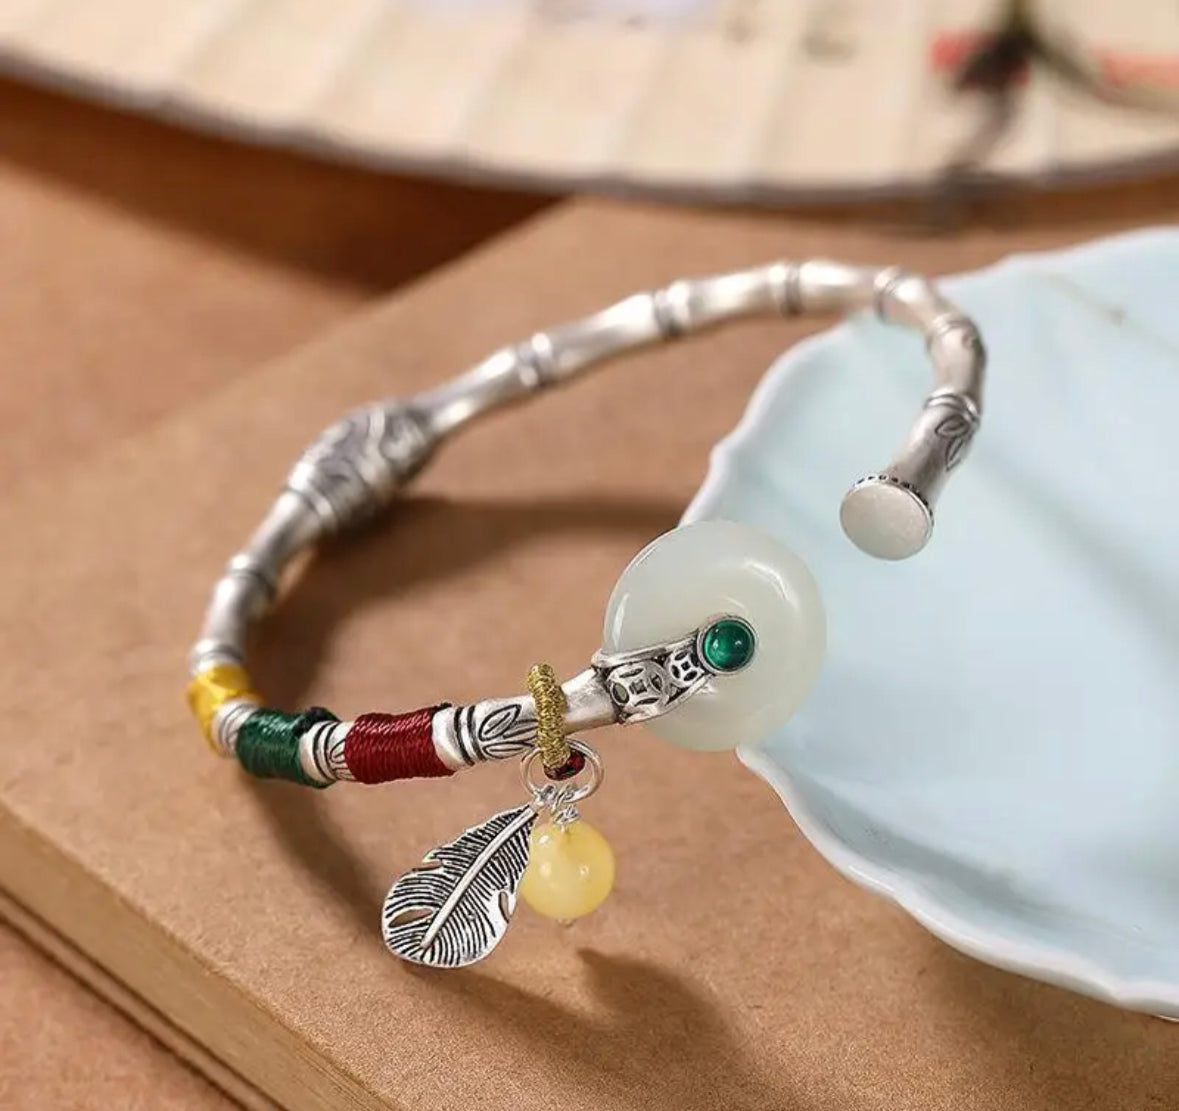 Three-dimensional craft new silver inlaid natural Hetian chalcedony bracelet ethnic style art classic creative jewelry